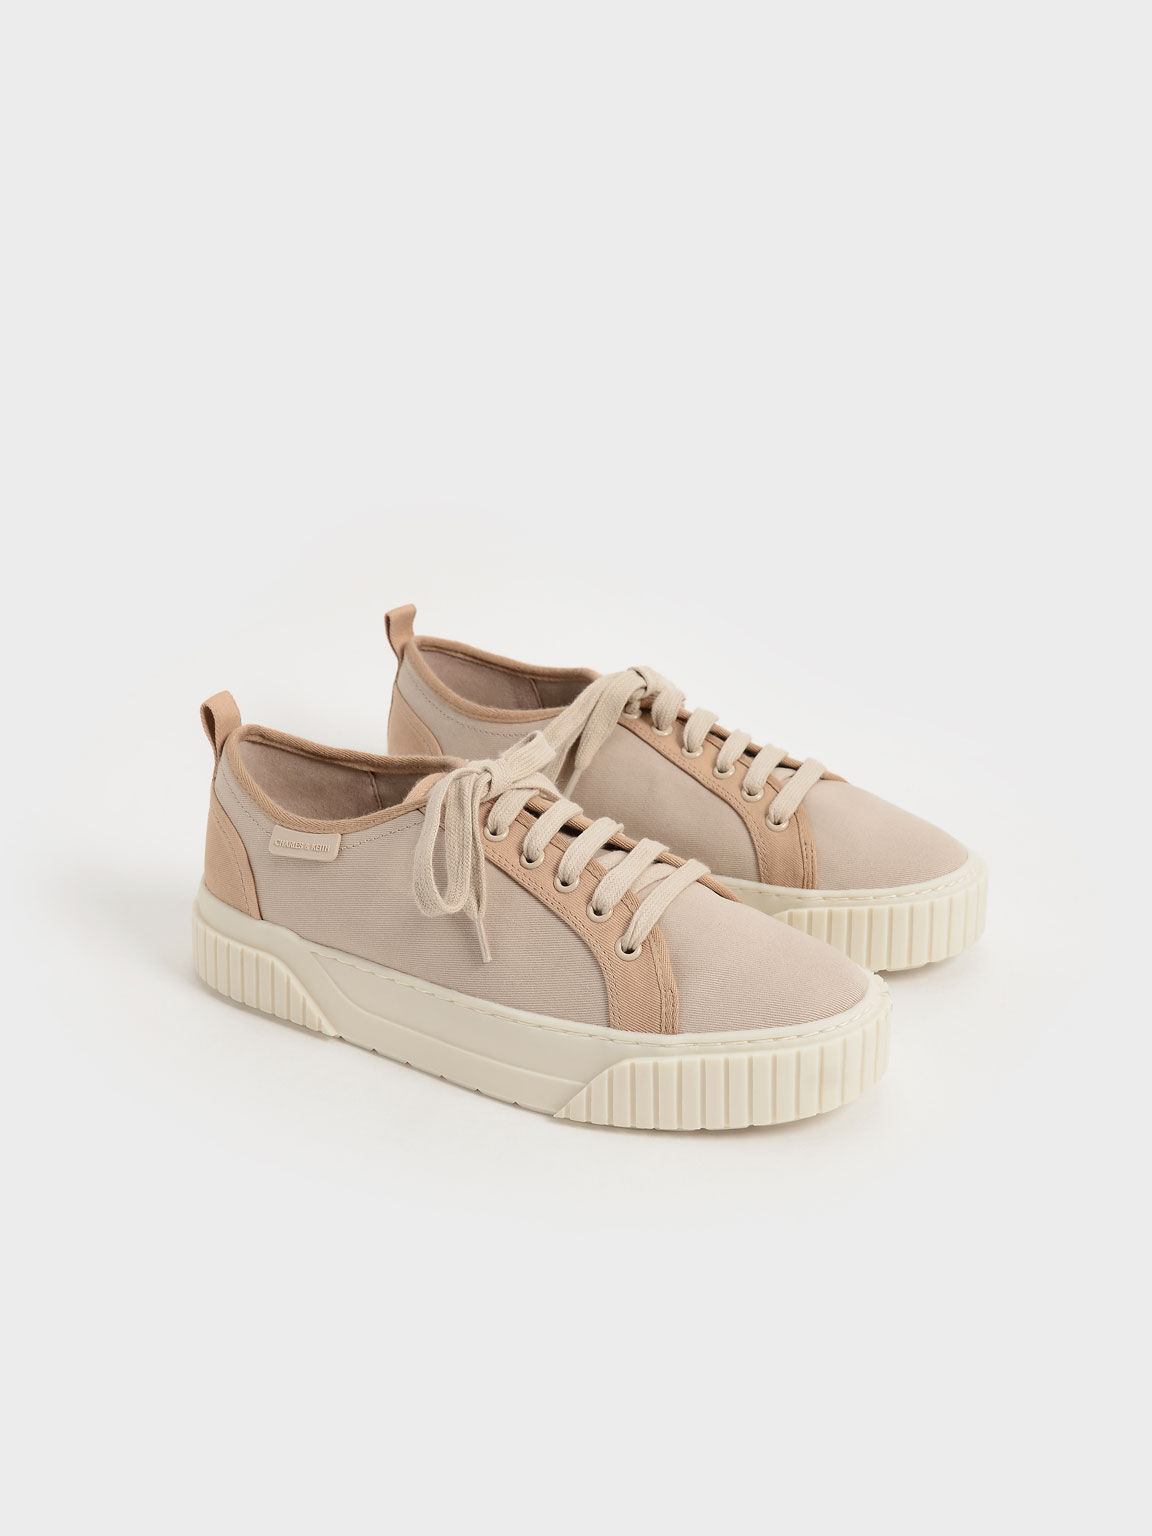 Cotton Low-Top Sneakers, Sand, hi-res